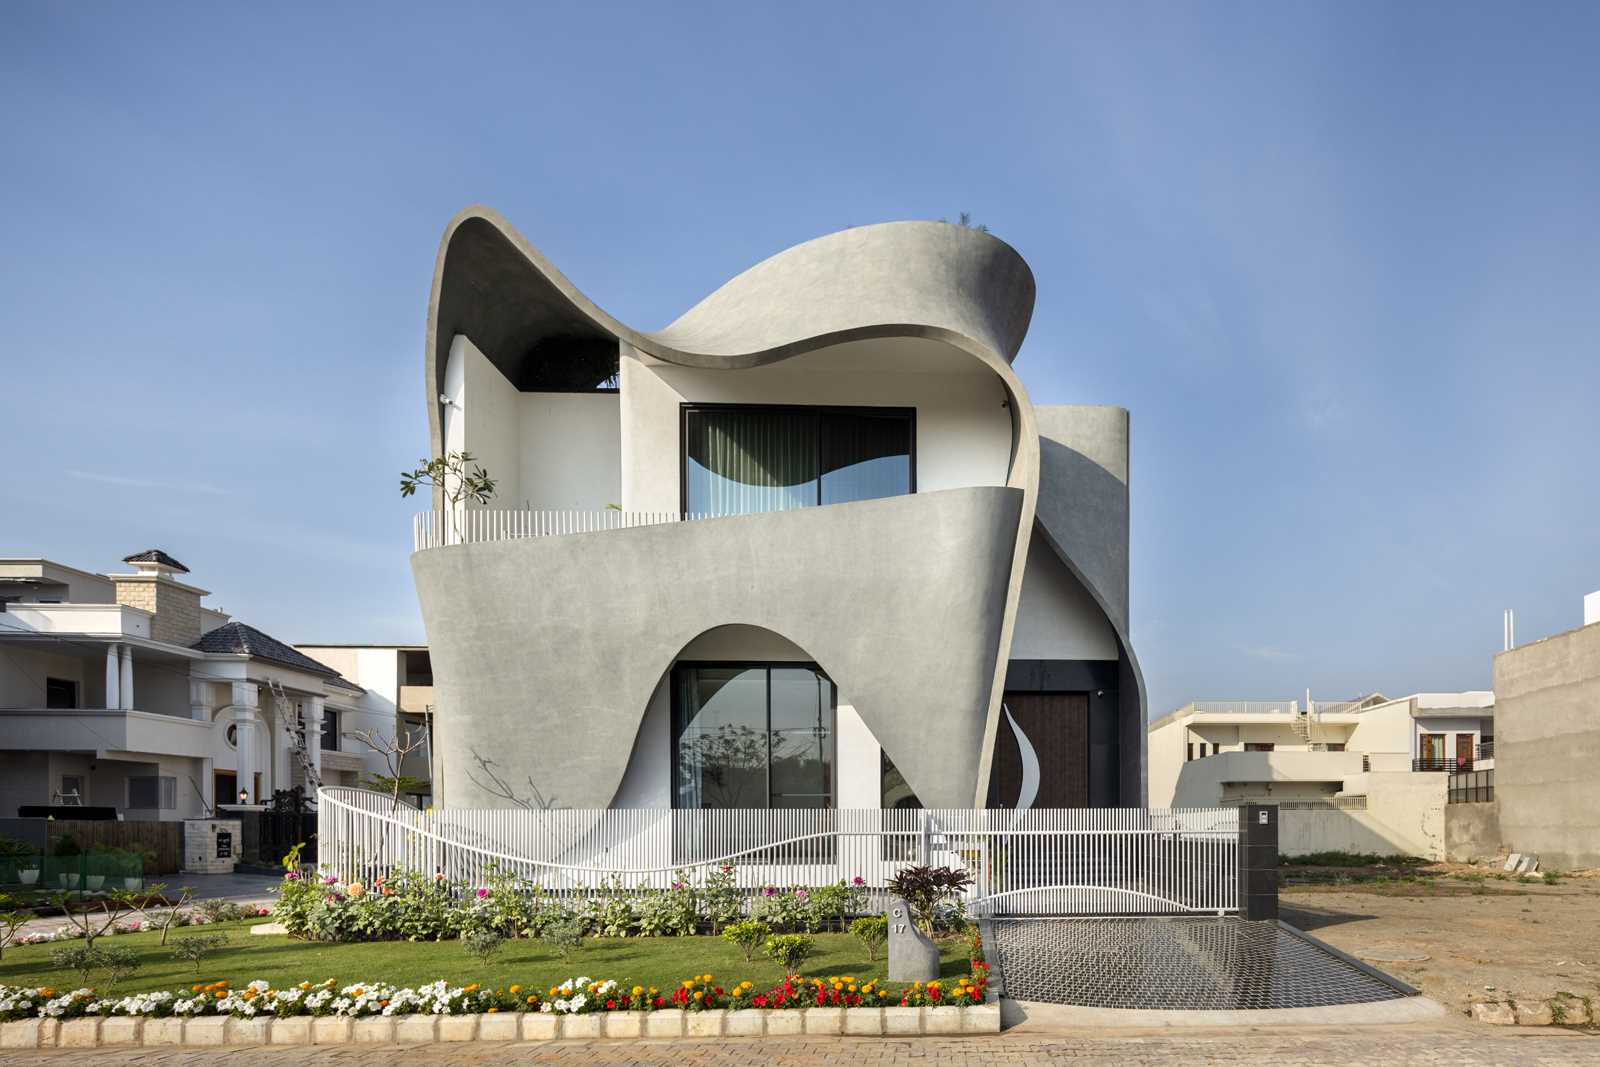 A modern house with a sculptural facade that features ribbon-inspired free-flowing concrete.